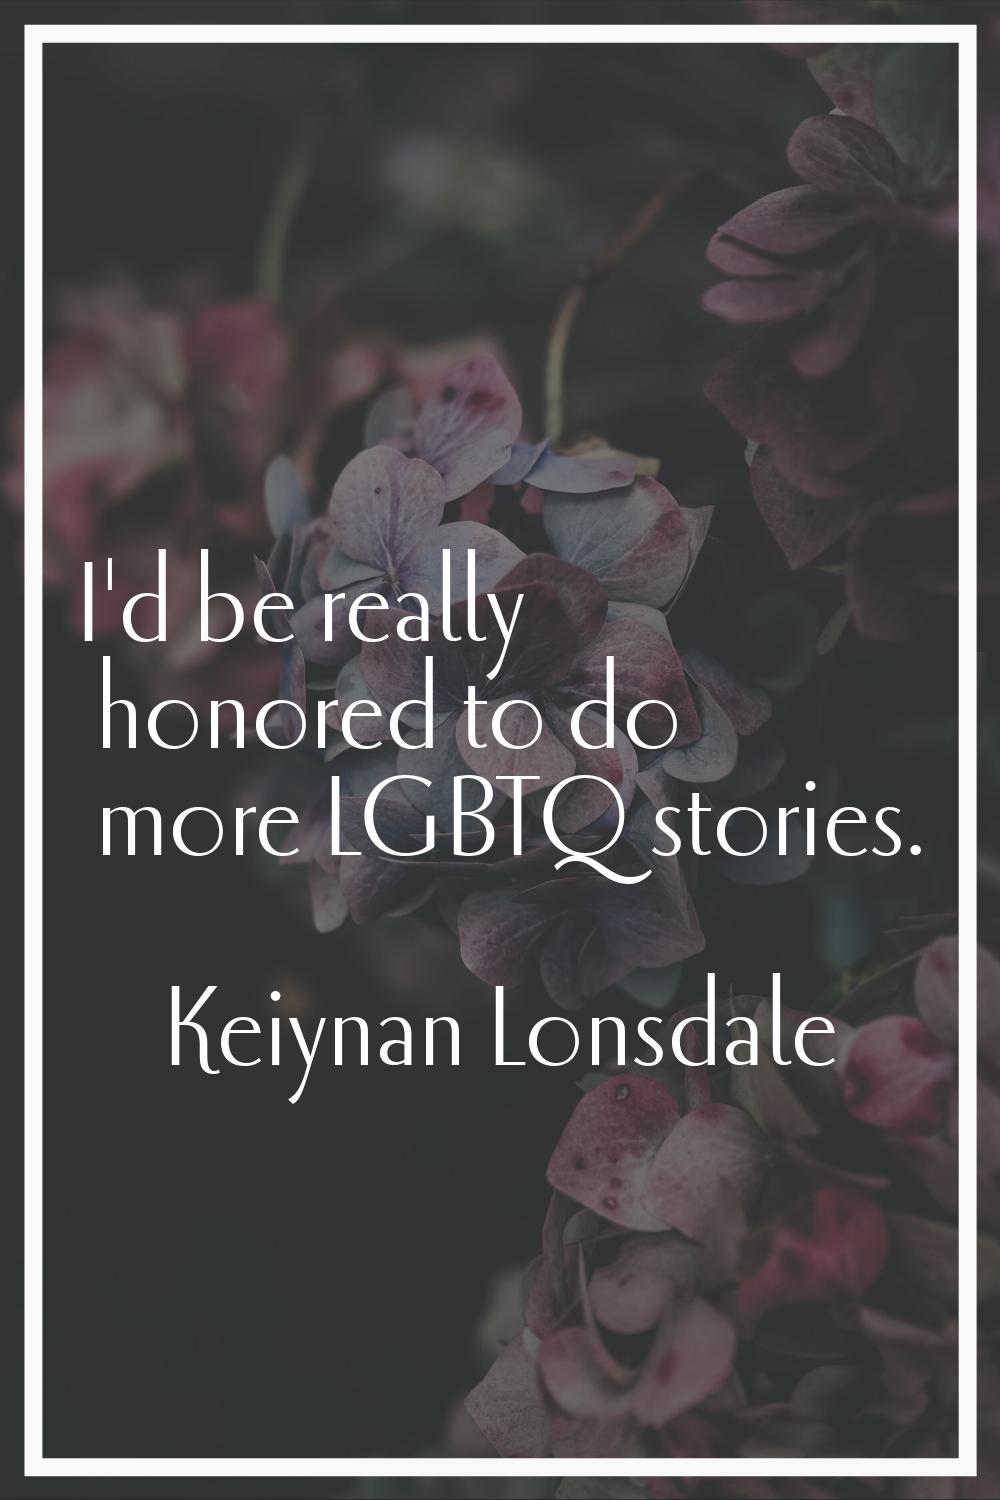 I'd be really honored to do more LGBTQ stories.